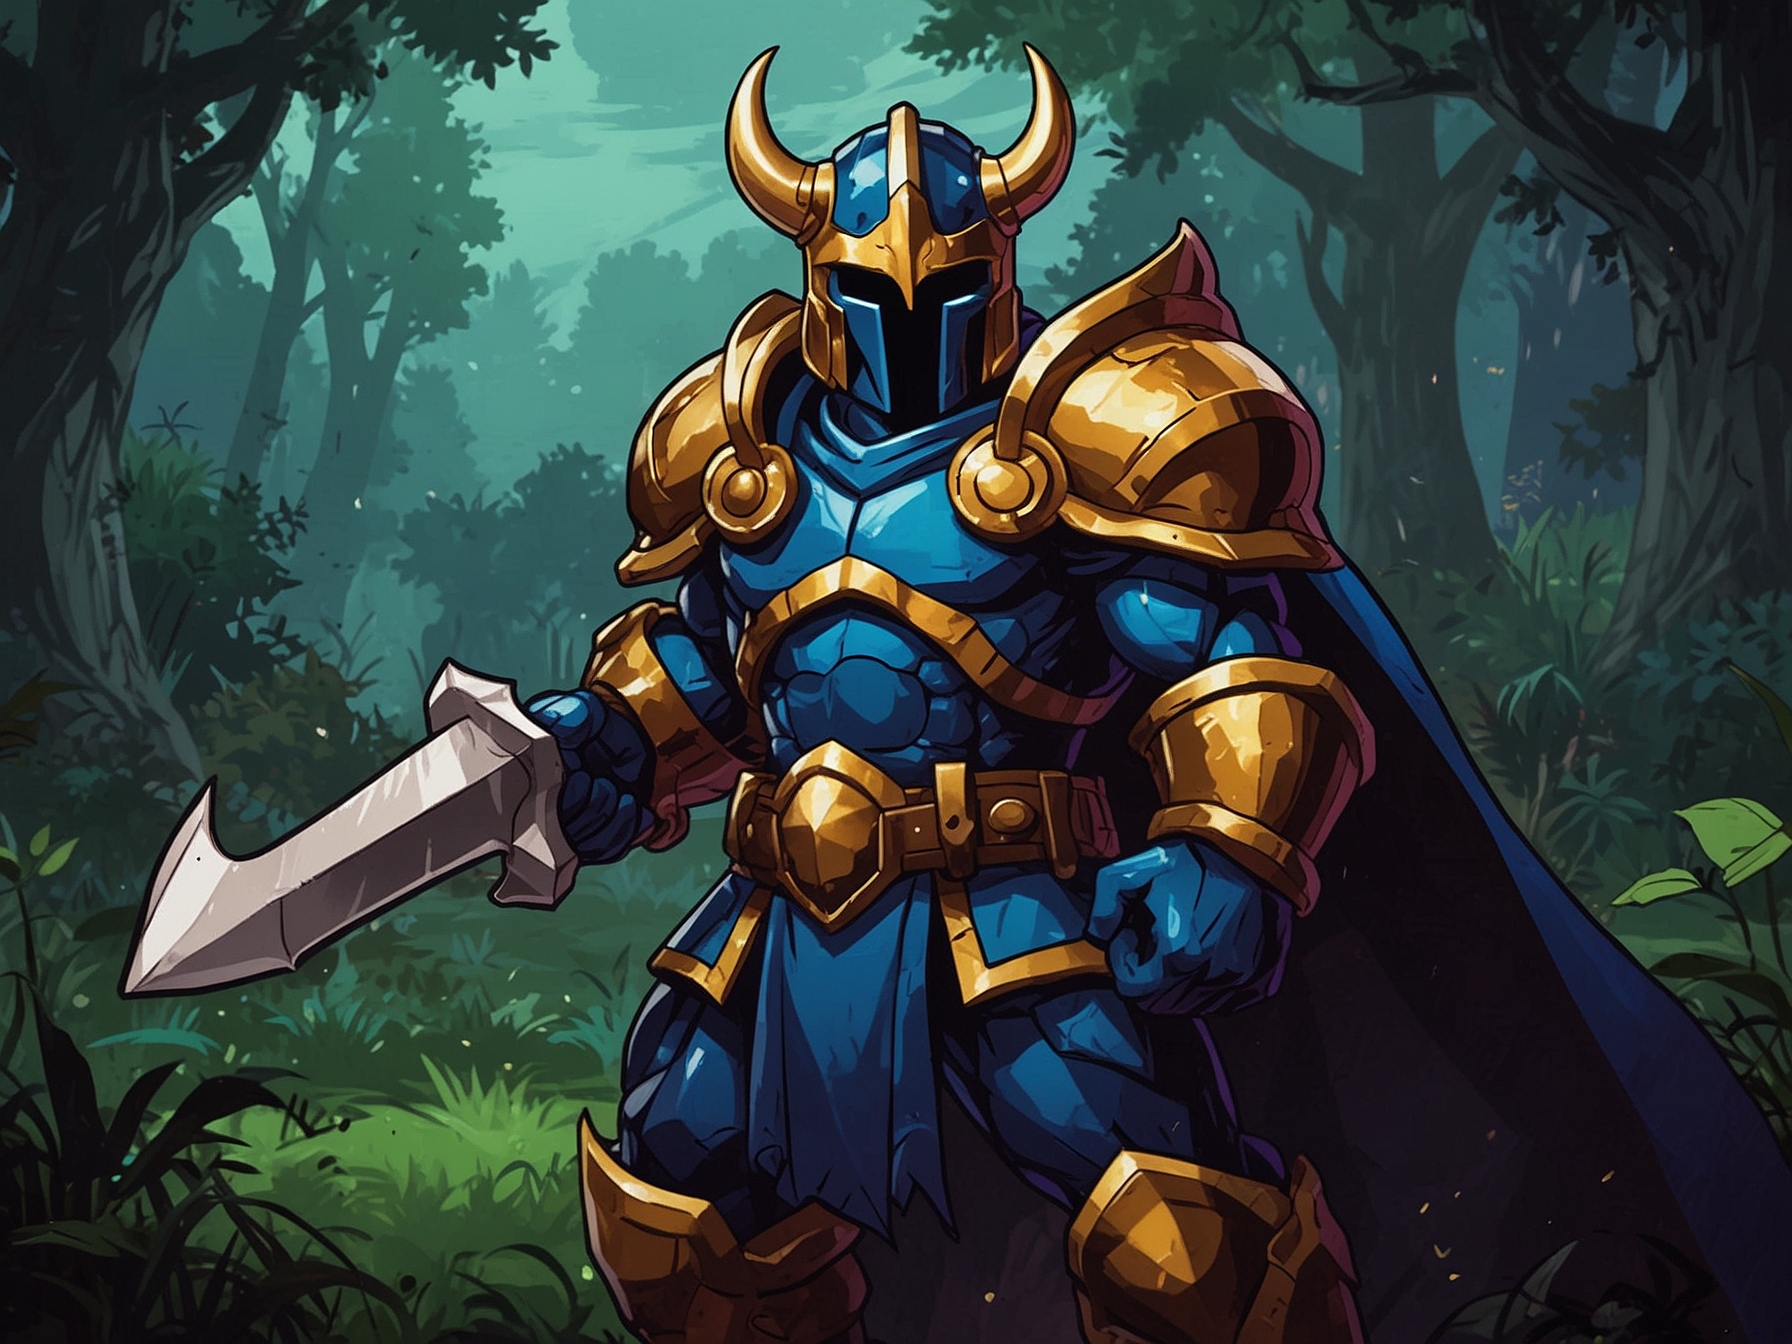 Cover art of Shovel Knight Definitive Edition showcasing the main character with his iconic shovel.